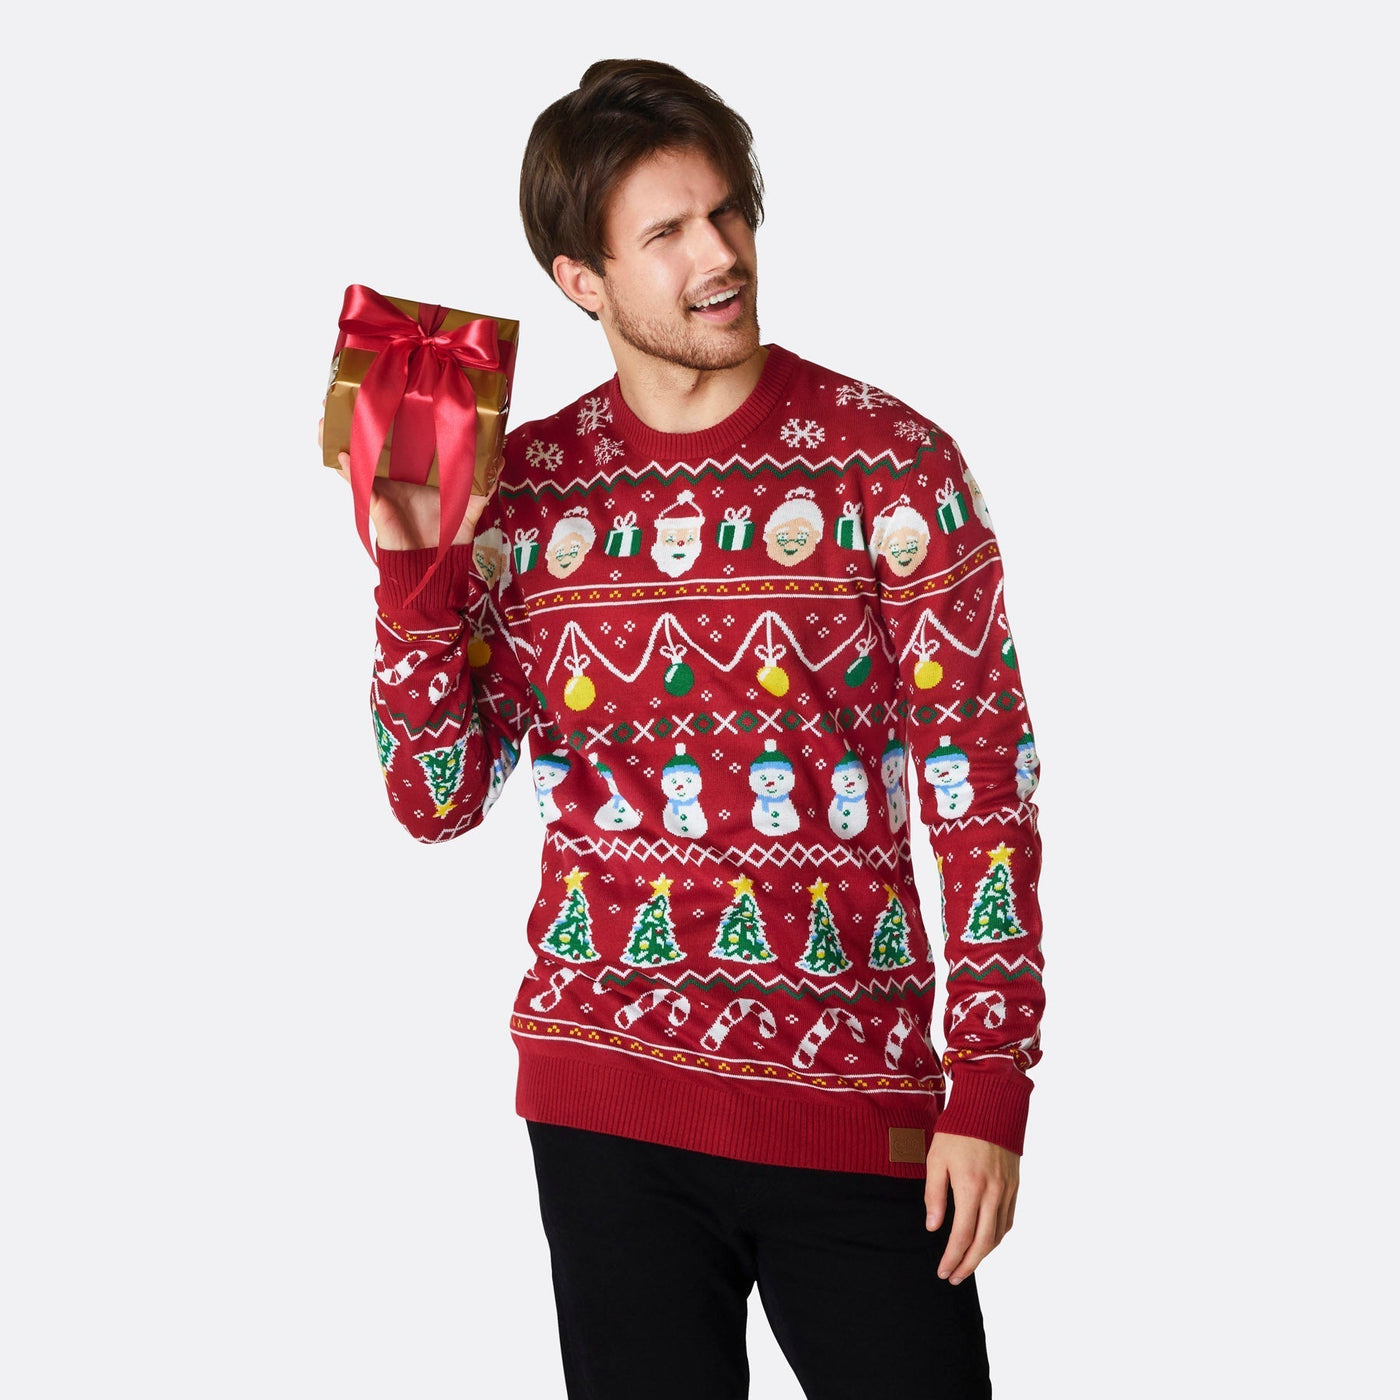 Men's Striped Red Christmas Sweater